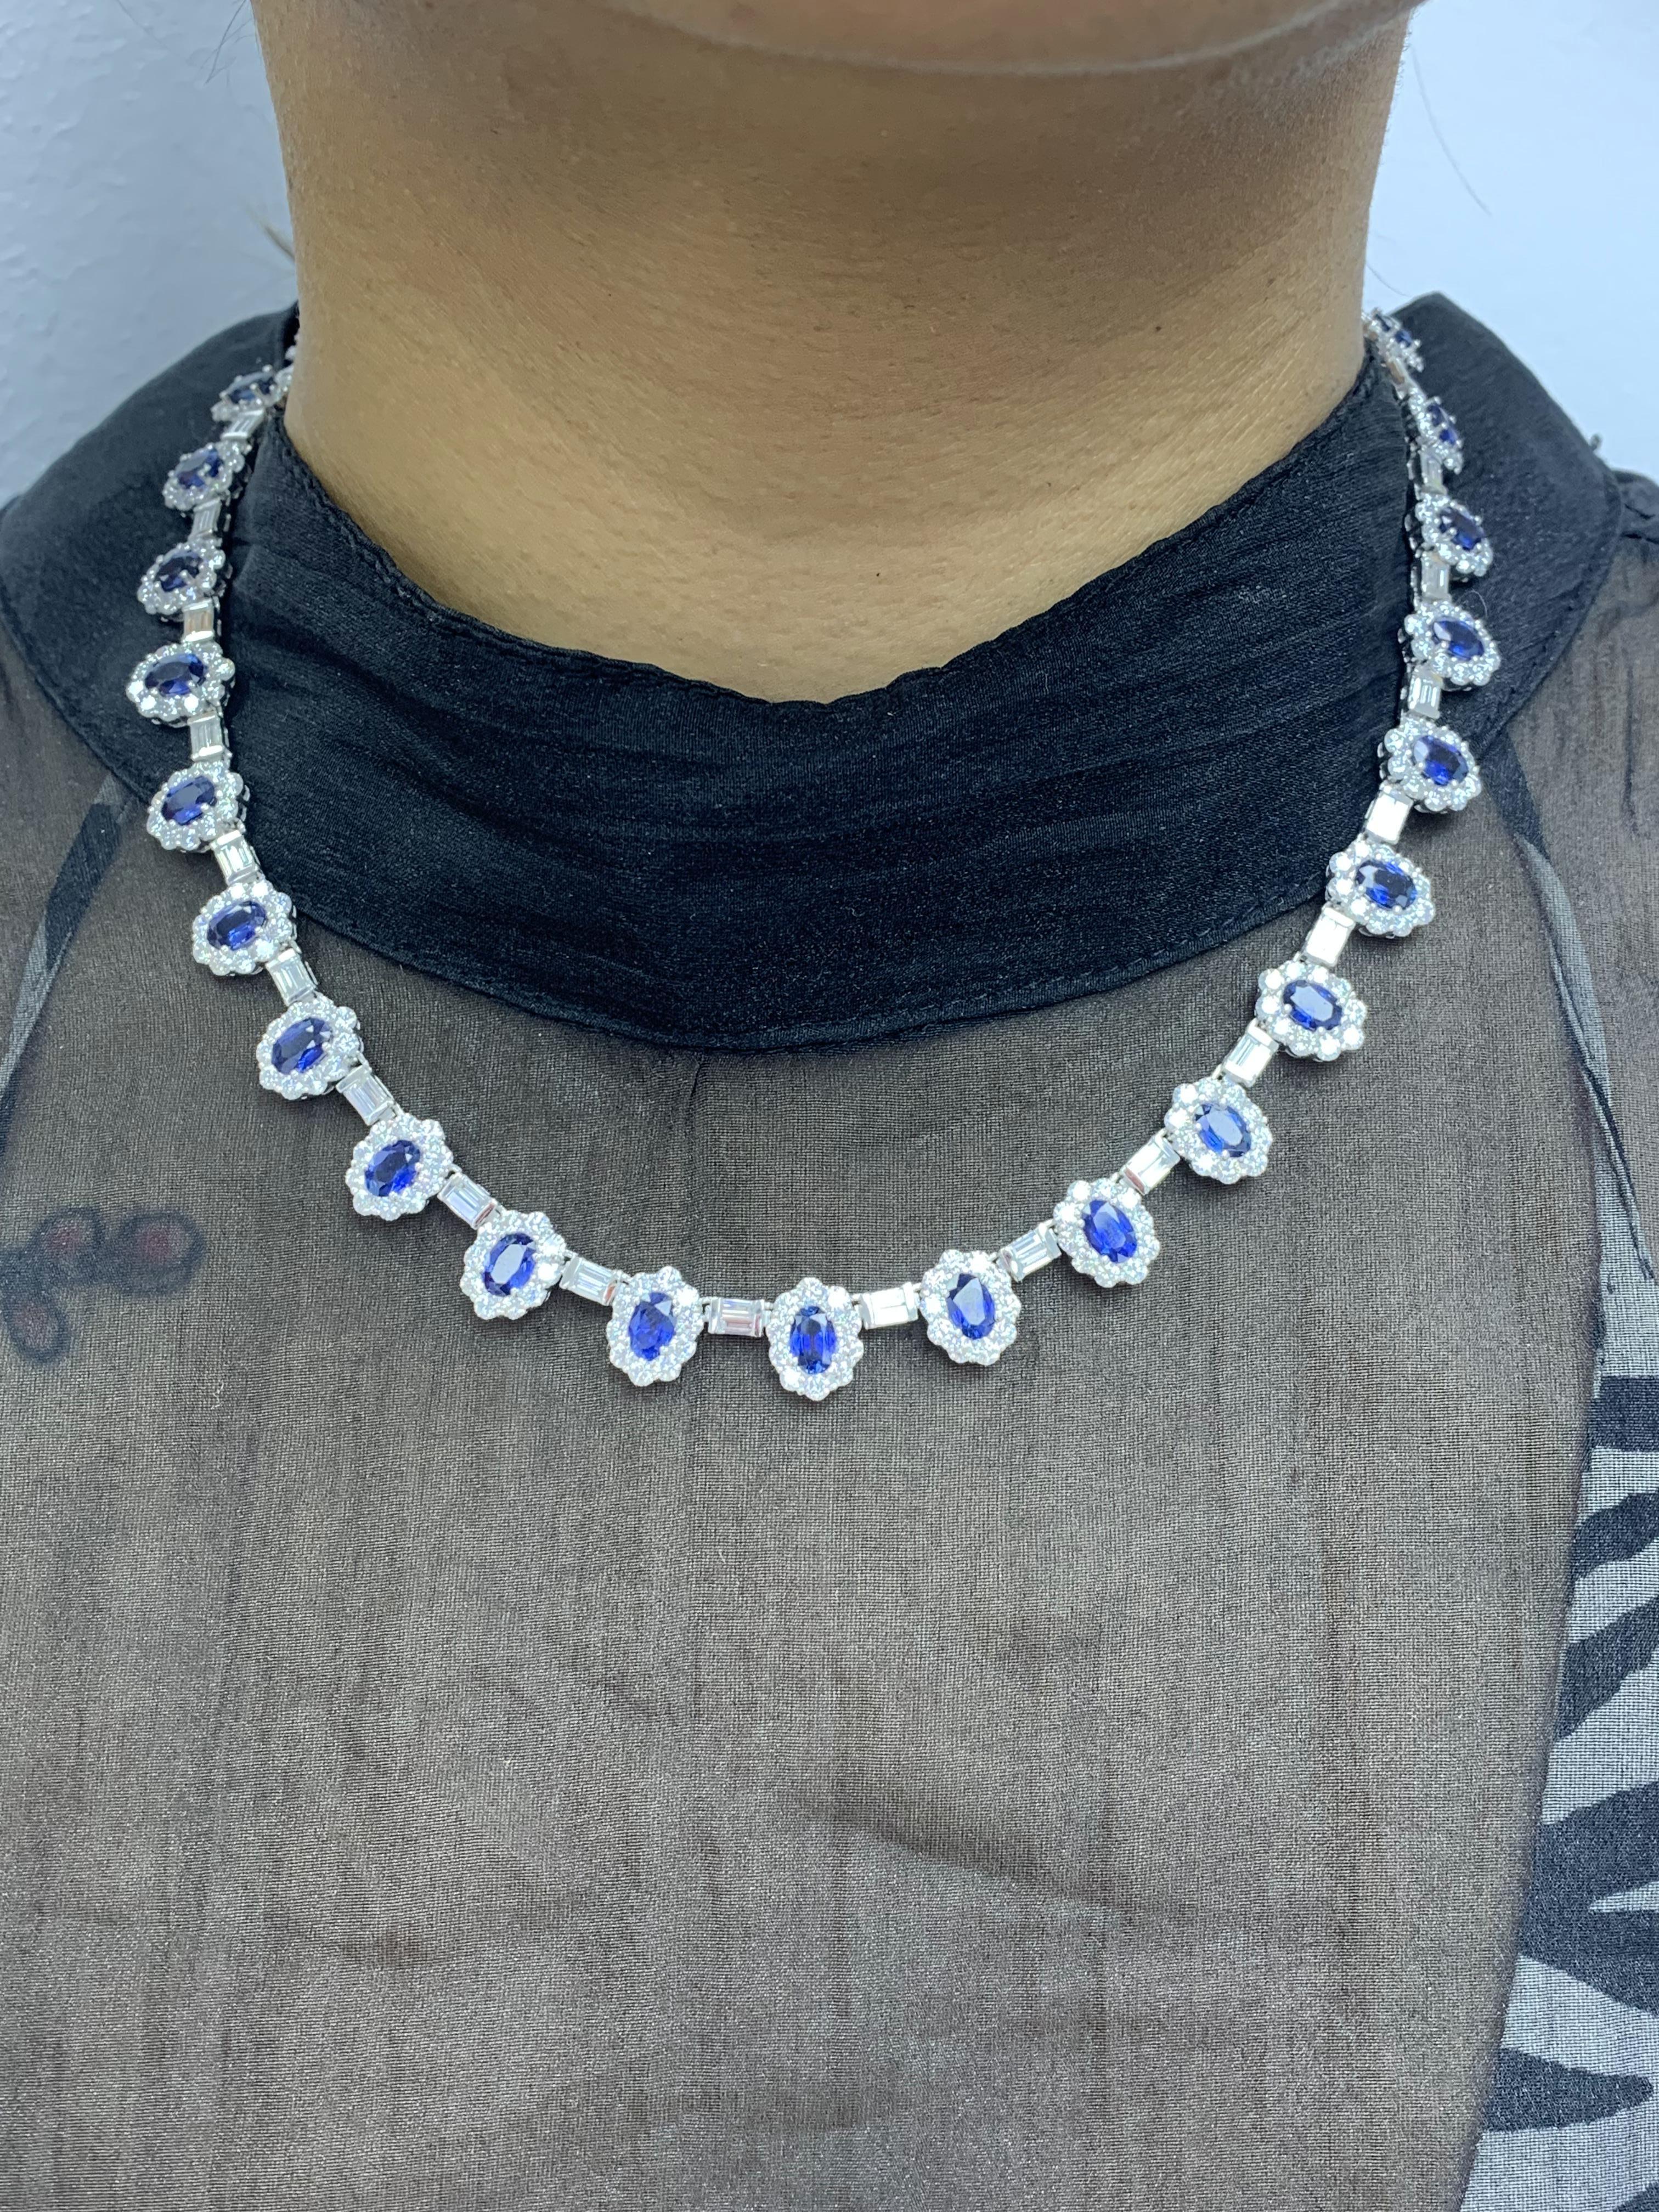 12.74 Carat Oval Cut Blue Sapphire and Diamond Necklace in 18K White Gold For Sale 2